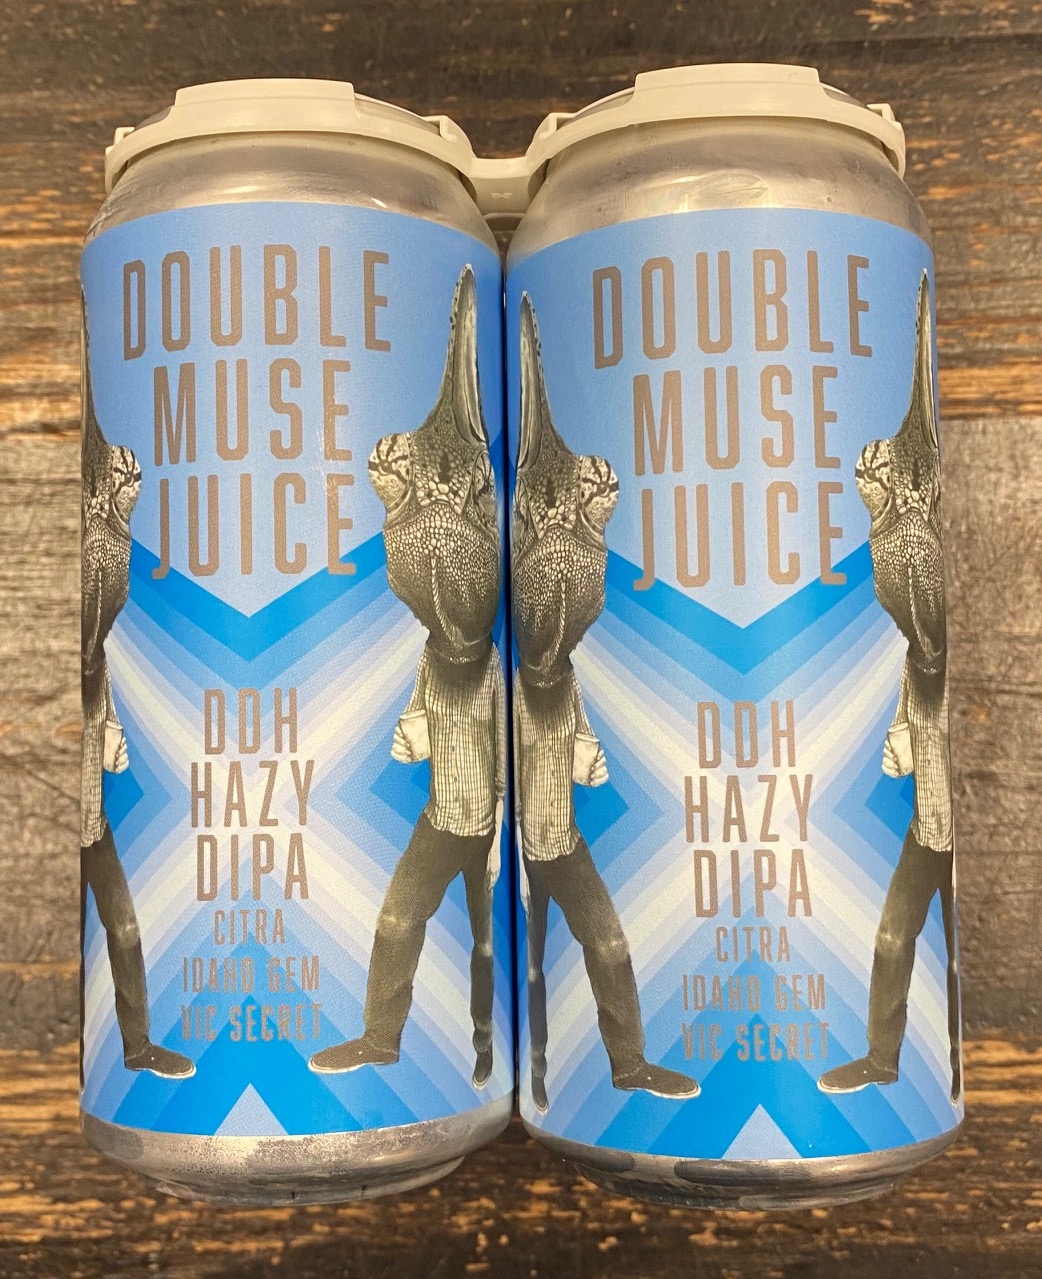 Odd Muse - DDH Double Muse Juice (4 pack 16oz cans) (4 pack 16oz cans)